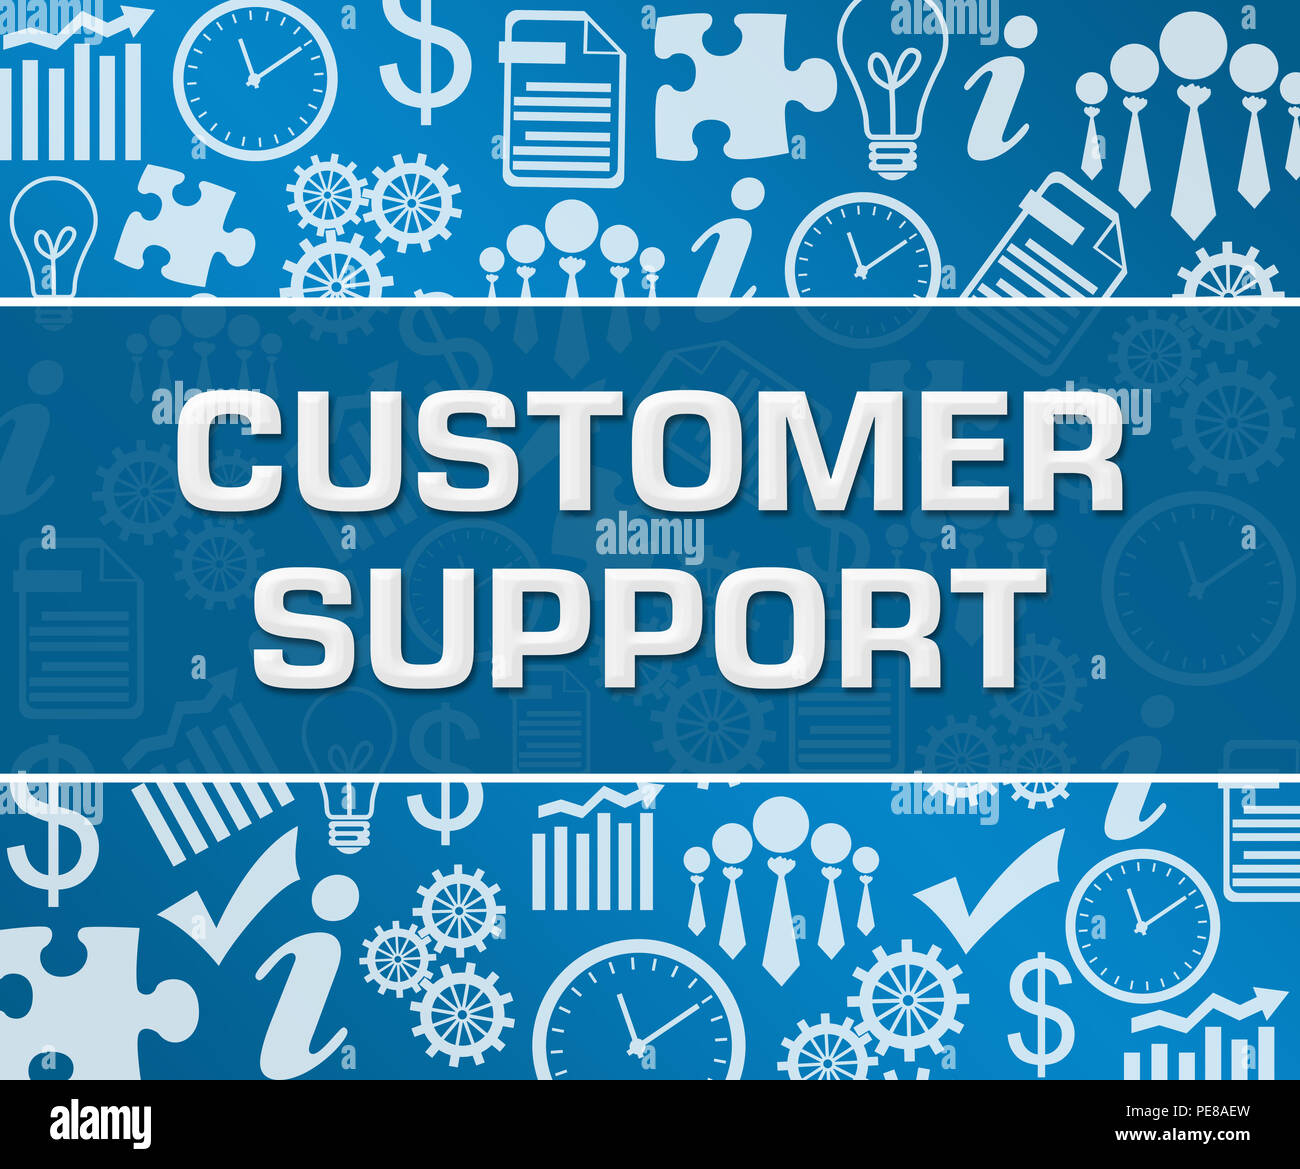 Customer support text written over blue background. Stock Photo